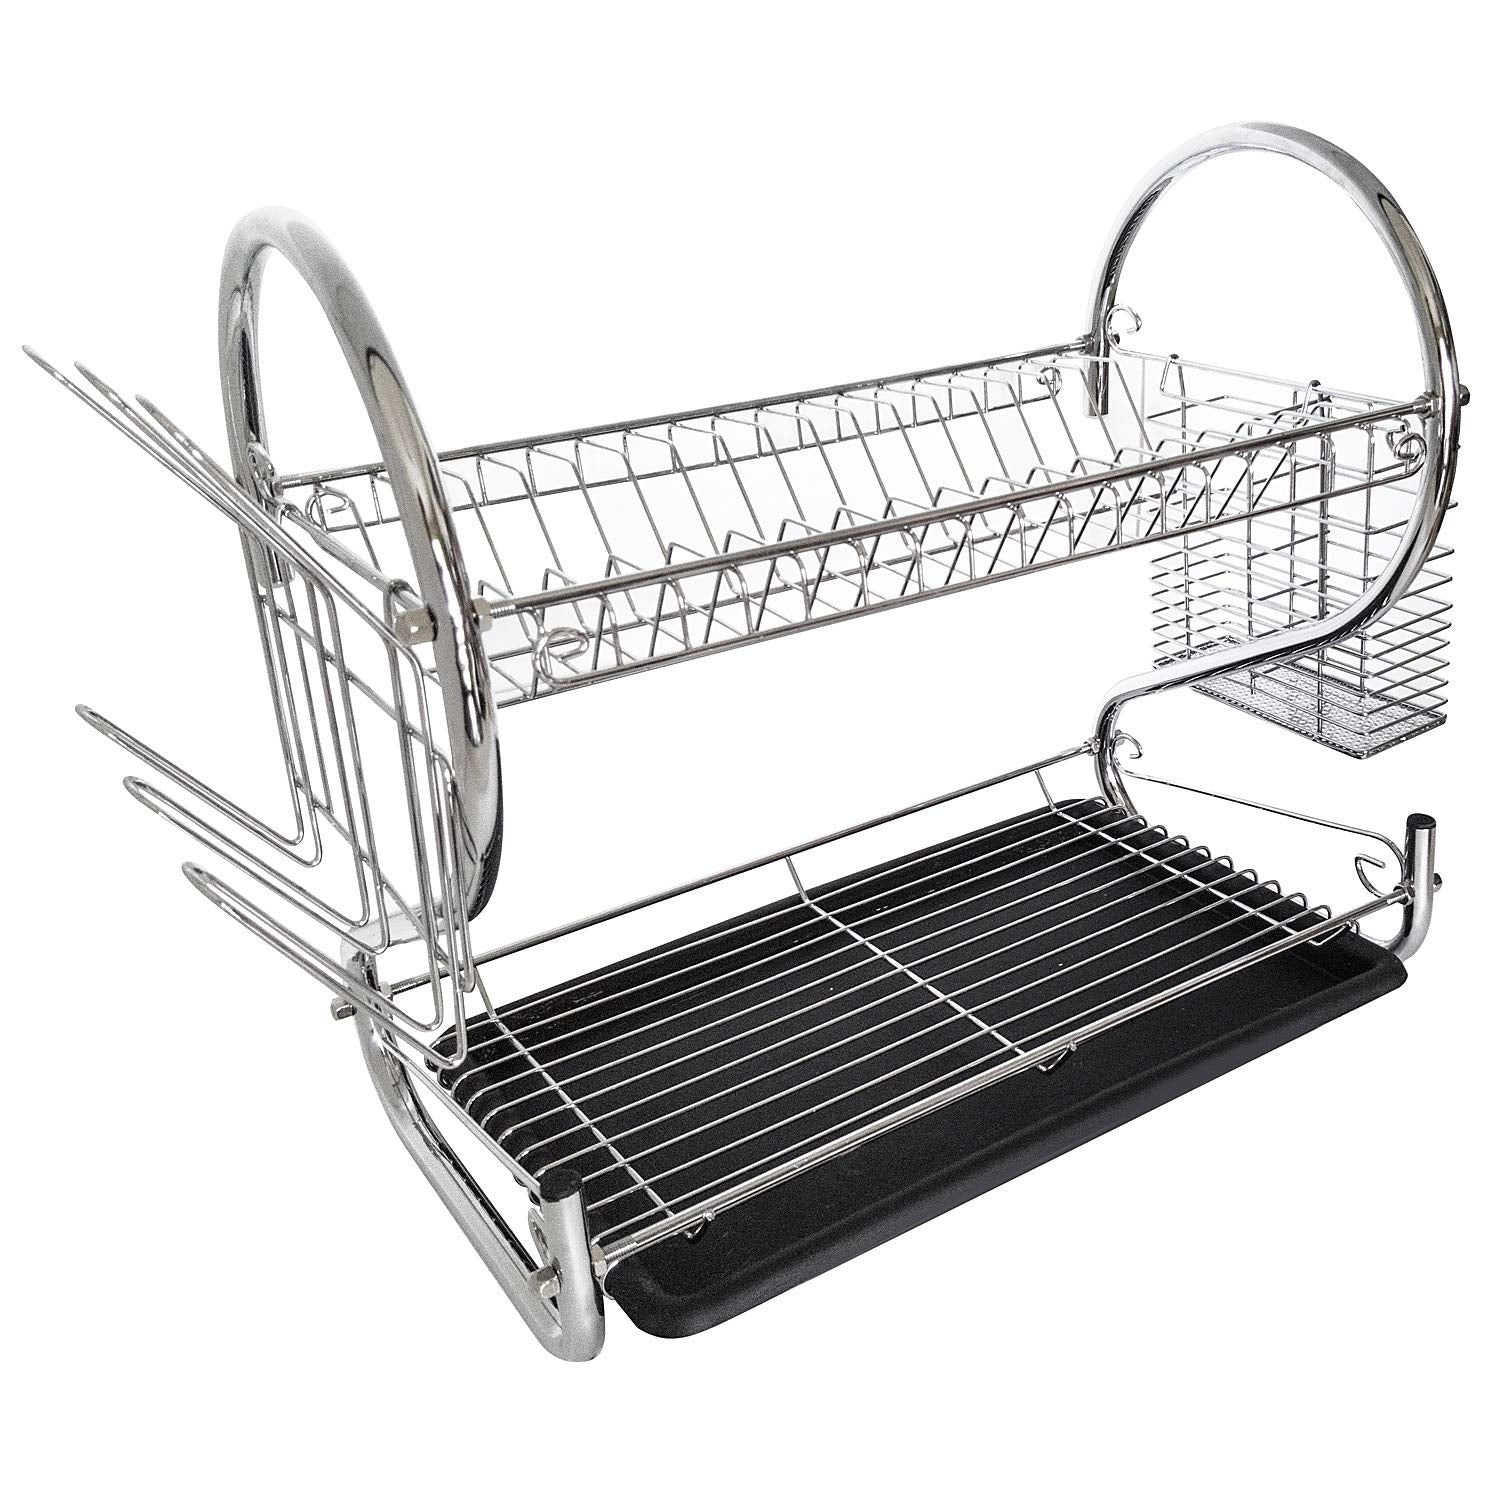 Tatkraft Helga 2-Tier Dish Drying Rack, Drainer with Drainboard for Kitchen Counter, Mug and Utensil Holder, Chrome-Plated, Easy Assembly